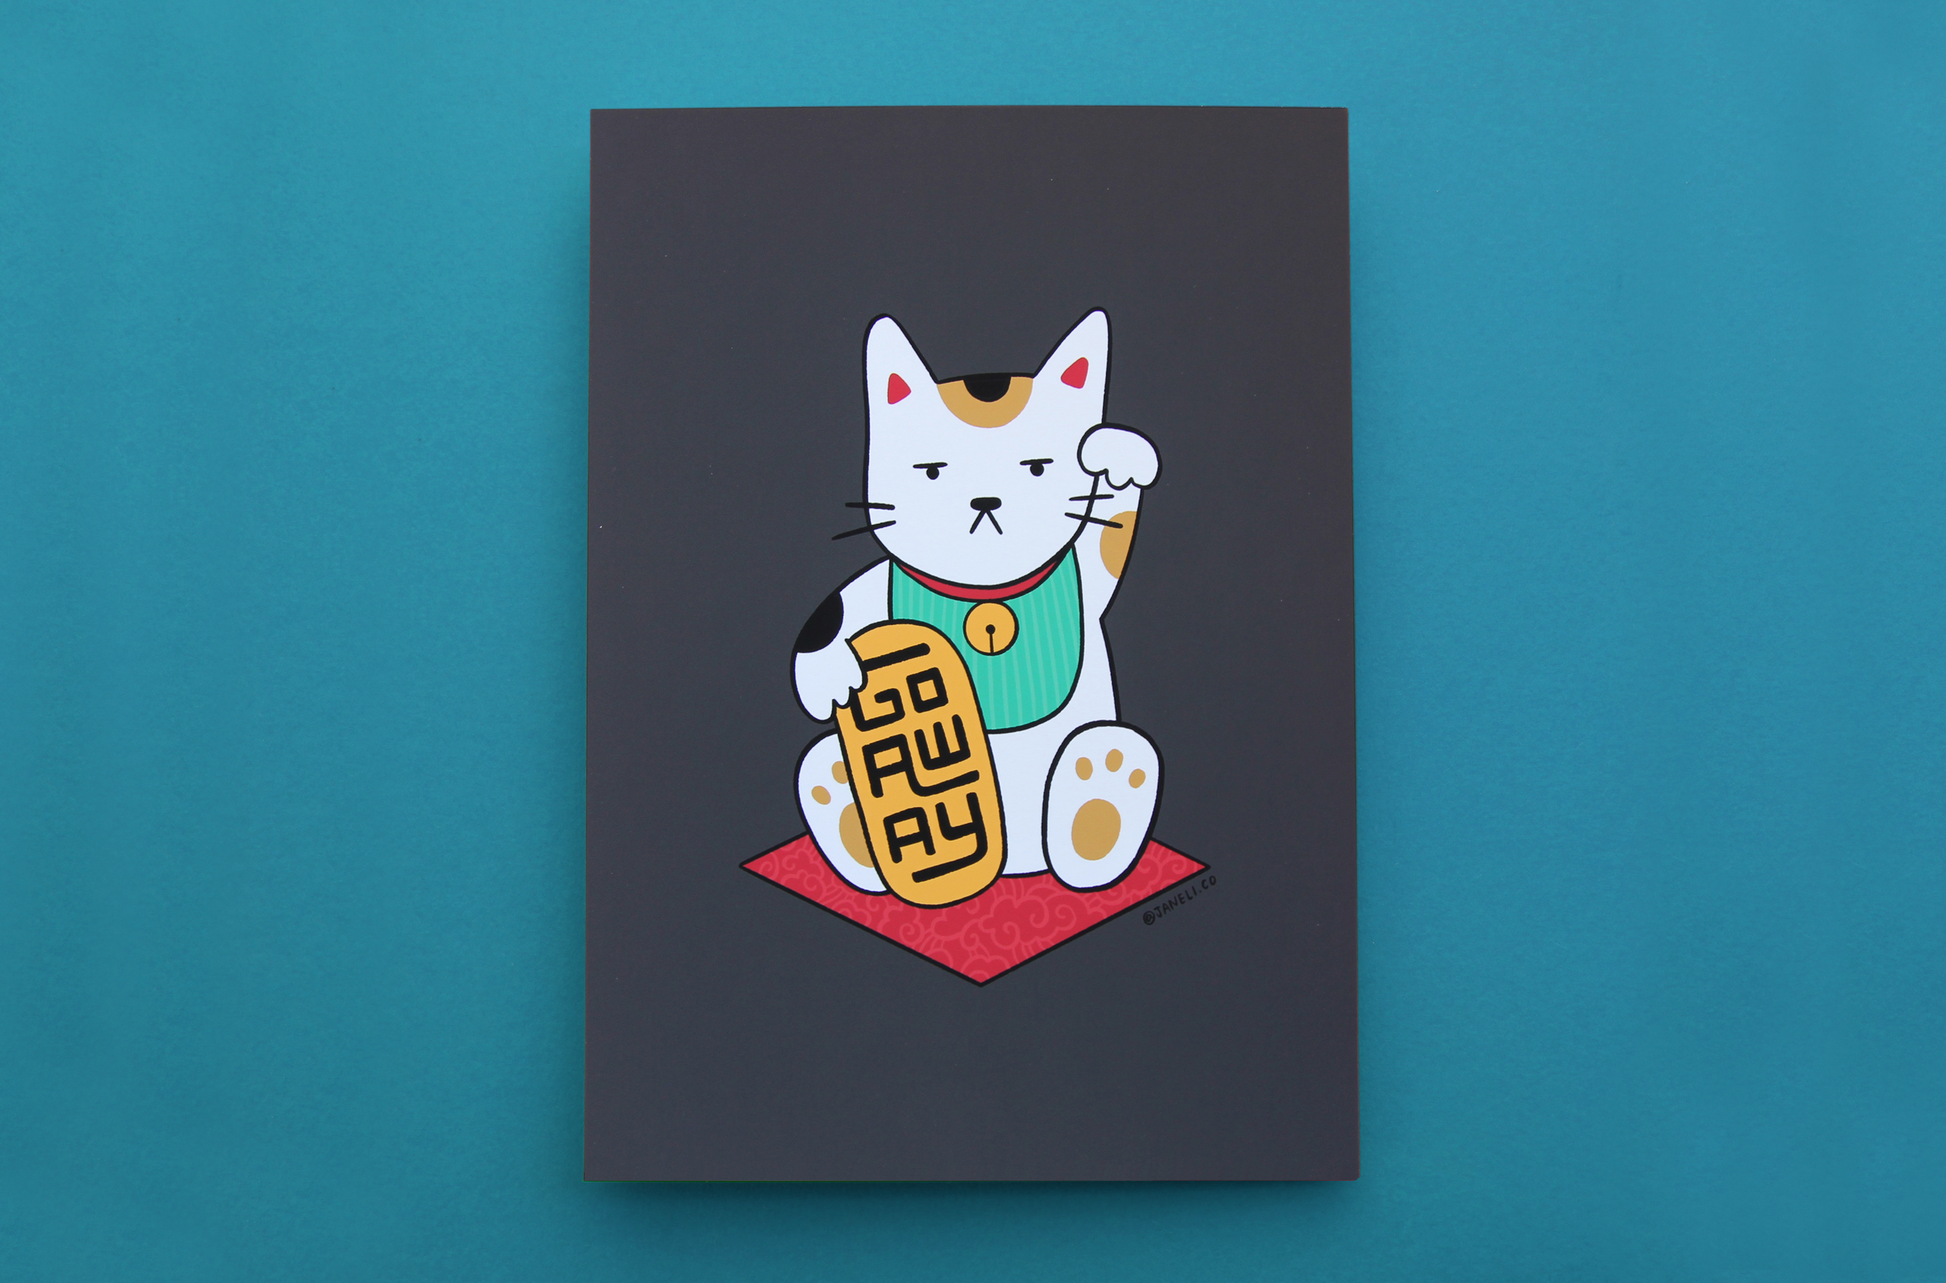 A JaneLi.Co print that shows a maneki neko cat holding a gold bar that says "Go Away" over a teal background.